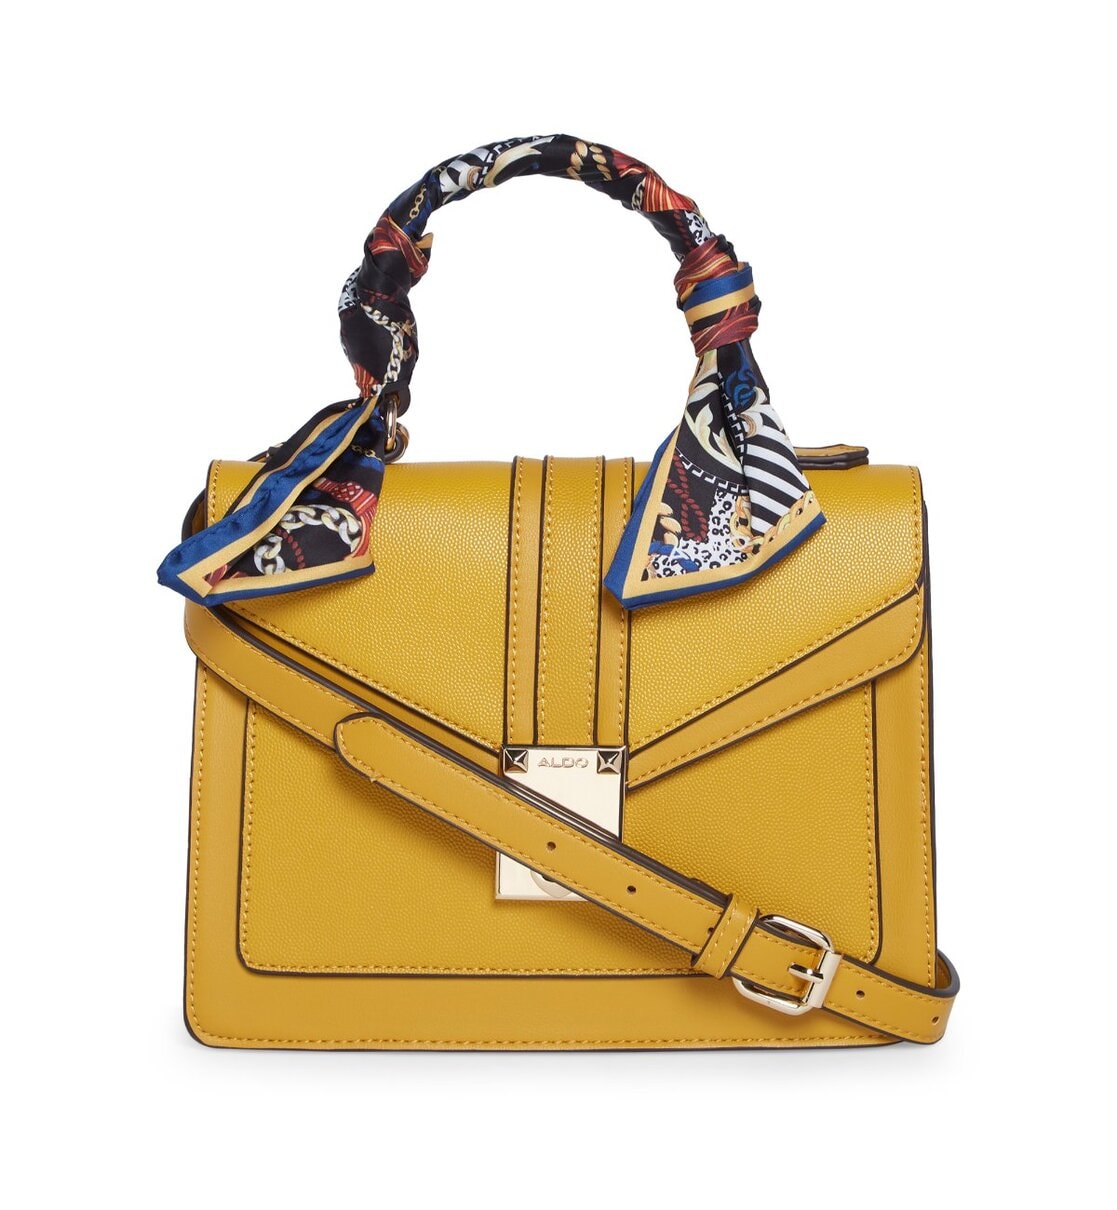 Buy Authentic Pre-owned Louis Vuitton Epi Tassili Yellow Malesherbes Handbag  Purse M52379 220136 from Japan - Buy authentic Plus exclusive items from  Japan | ZenPlus